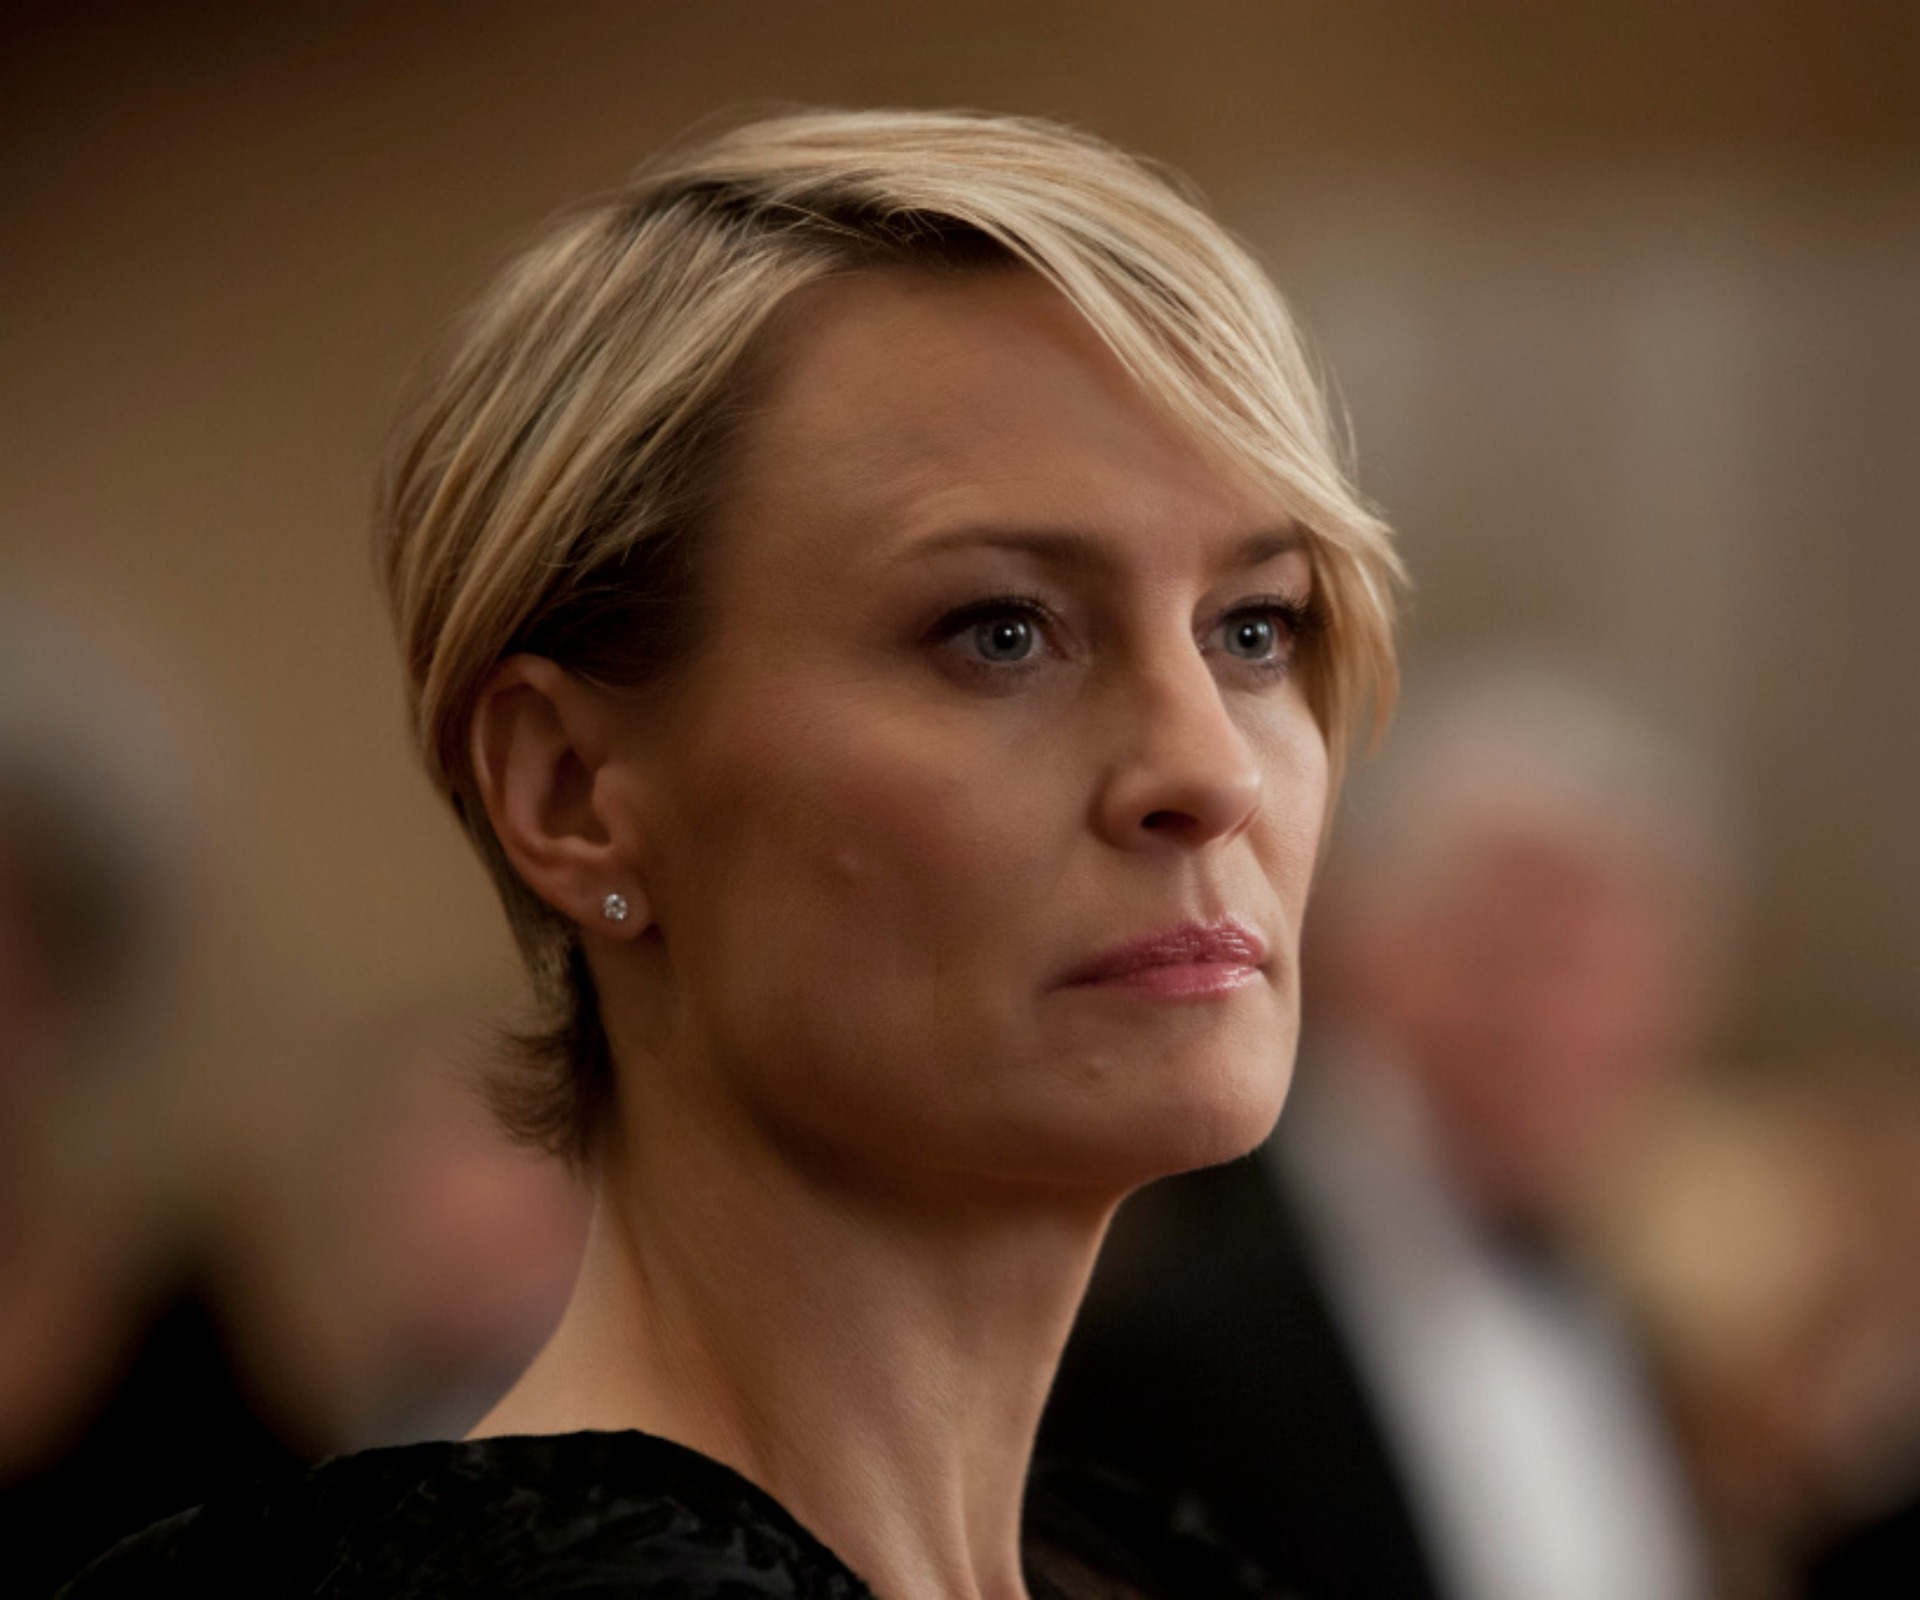 Robin Wright to House of Cards: ‘Equal pay or I walk’